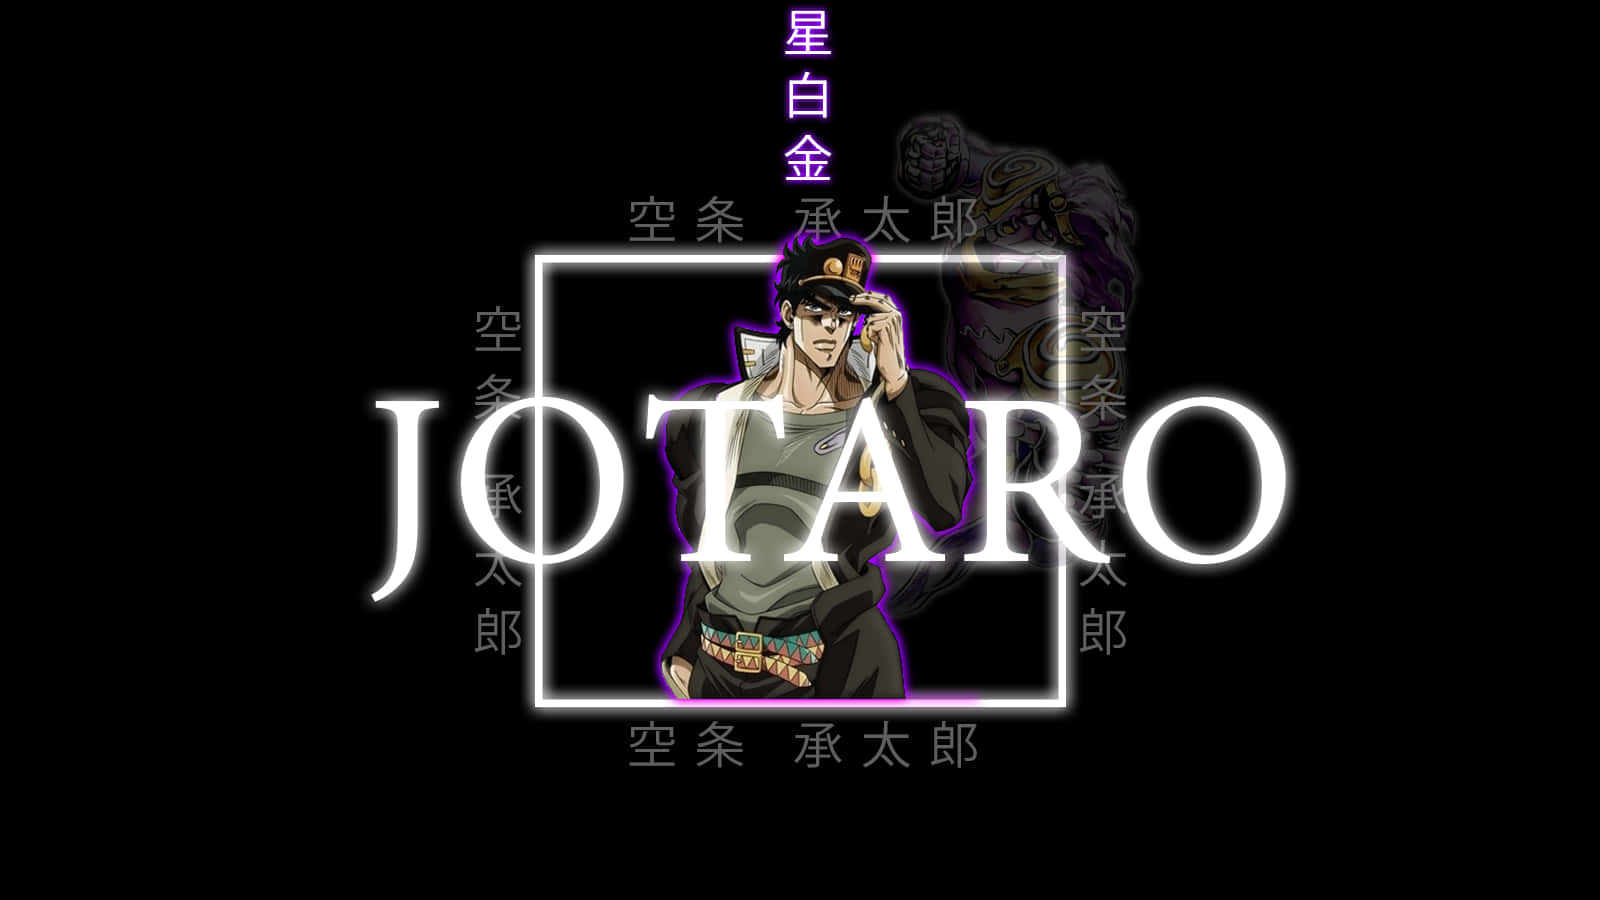 Jotaro Kujo and Star Platinum, ready to take on the forces of evil.